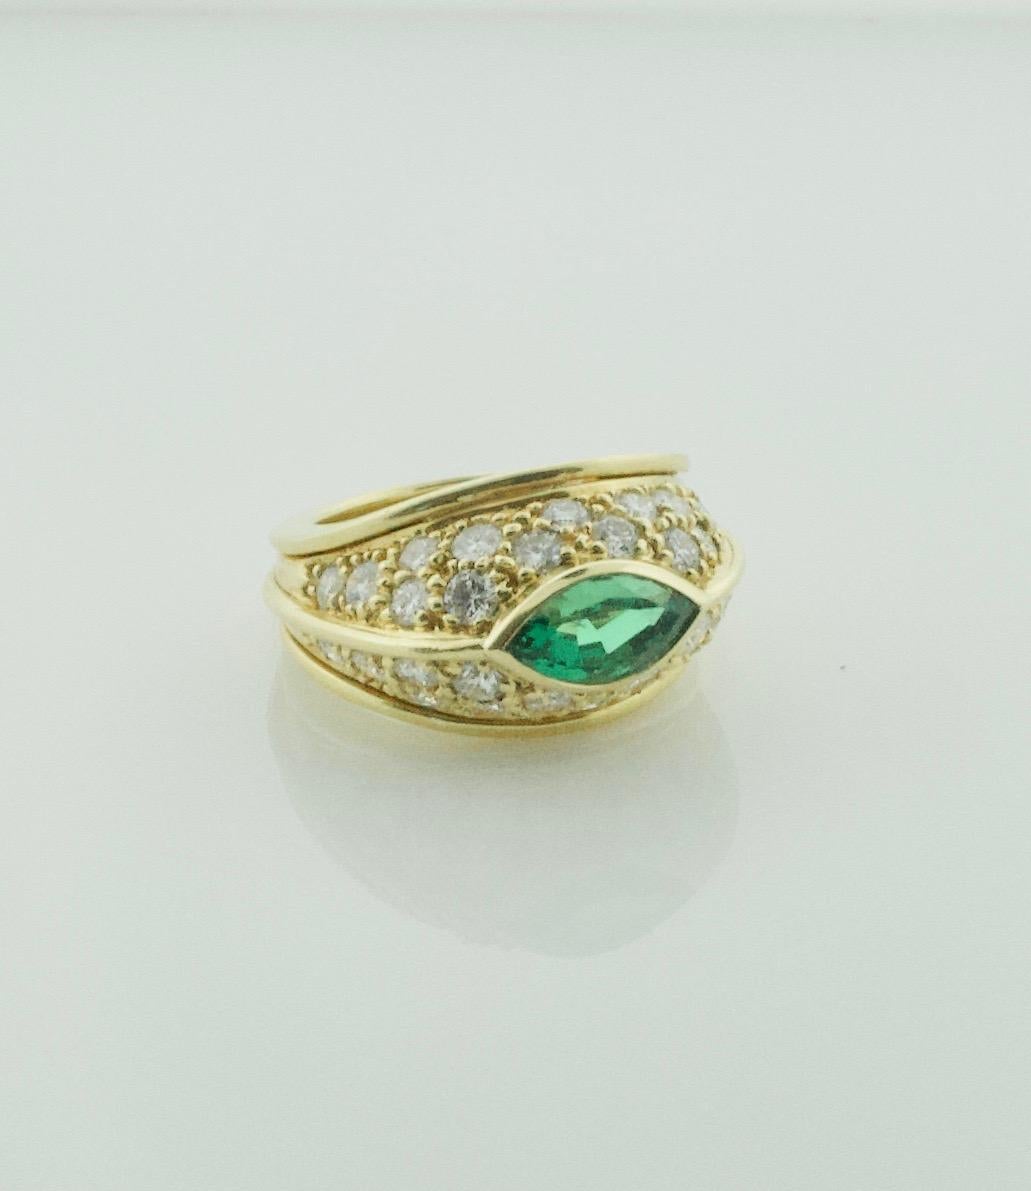 Very Fine Marquise Emerald and Diamond Ring in 18k
One Very Fine Marquise Cut Emerald Weighing 1.92 Carats [Vibrant Green with No Visible Imperfections]
Thirty Round Brilliant Cut Diamonds Weighing 1.94 Carats Approximately [GH VVS-VS]
A One of  a